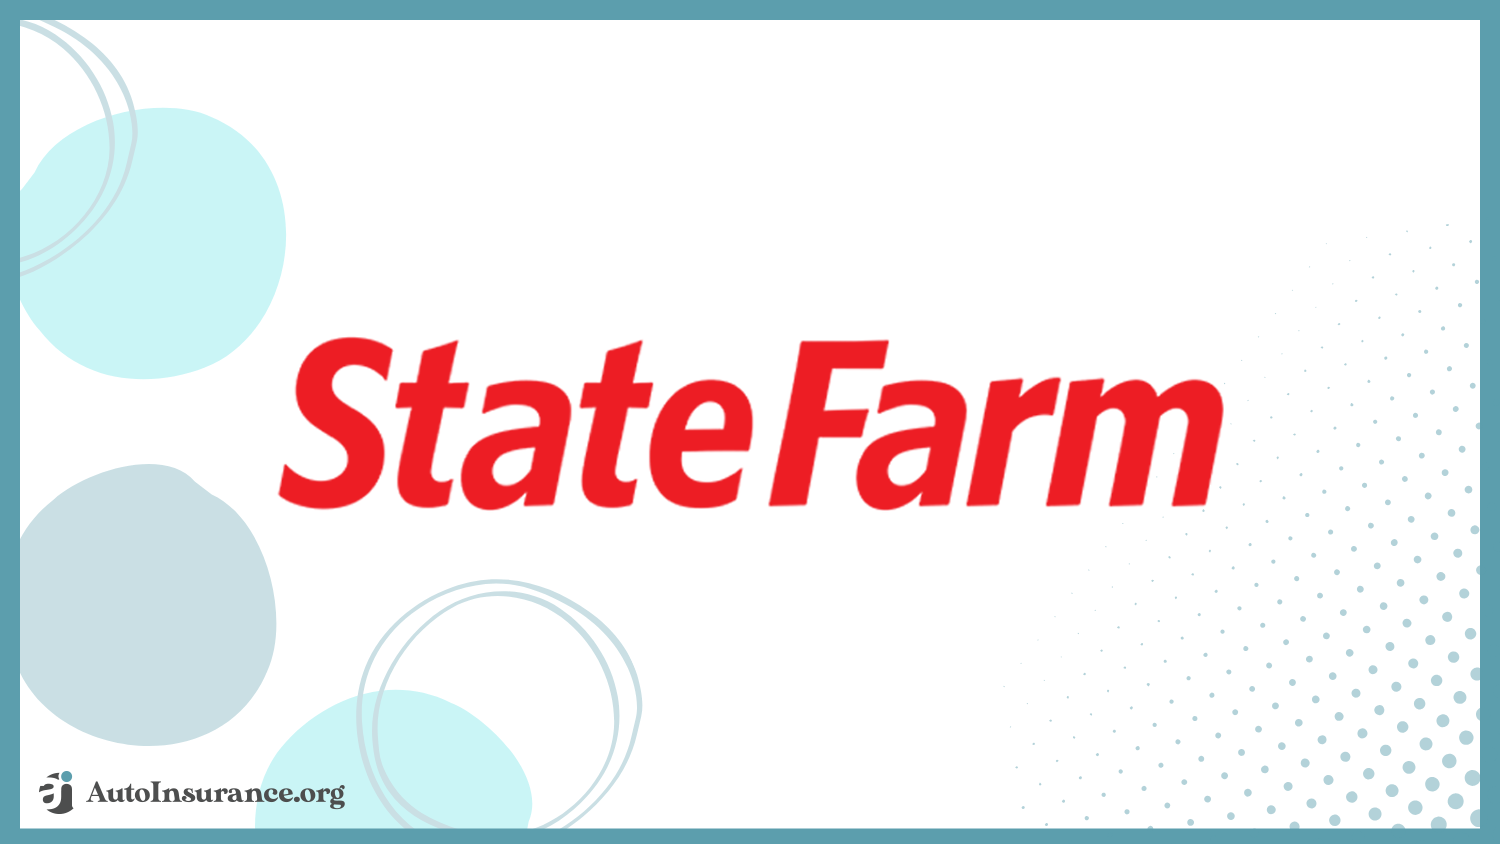 State Farm: 10 Best Auto Insurance Companies for Accident Forgiveness